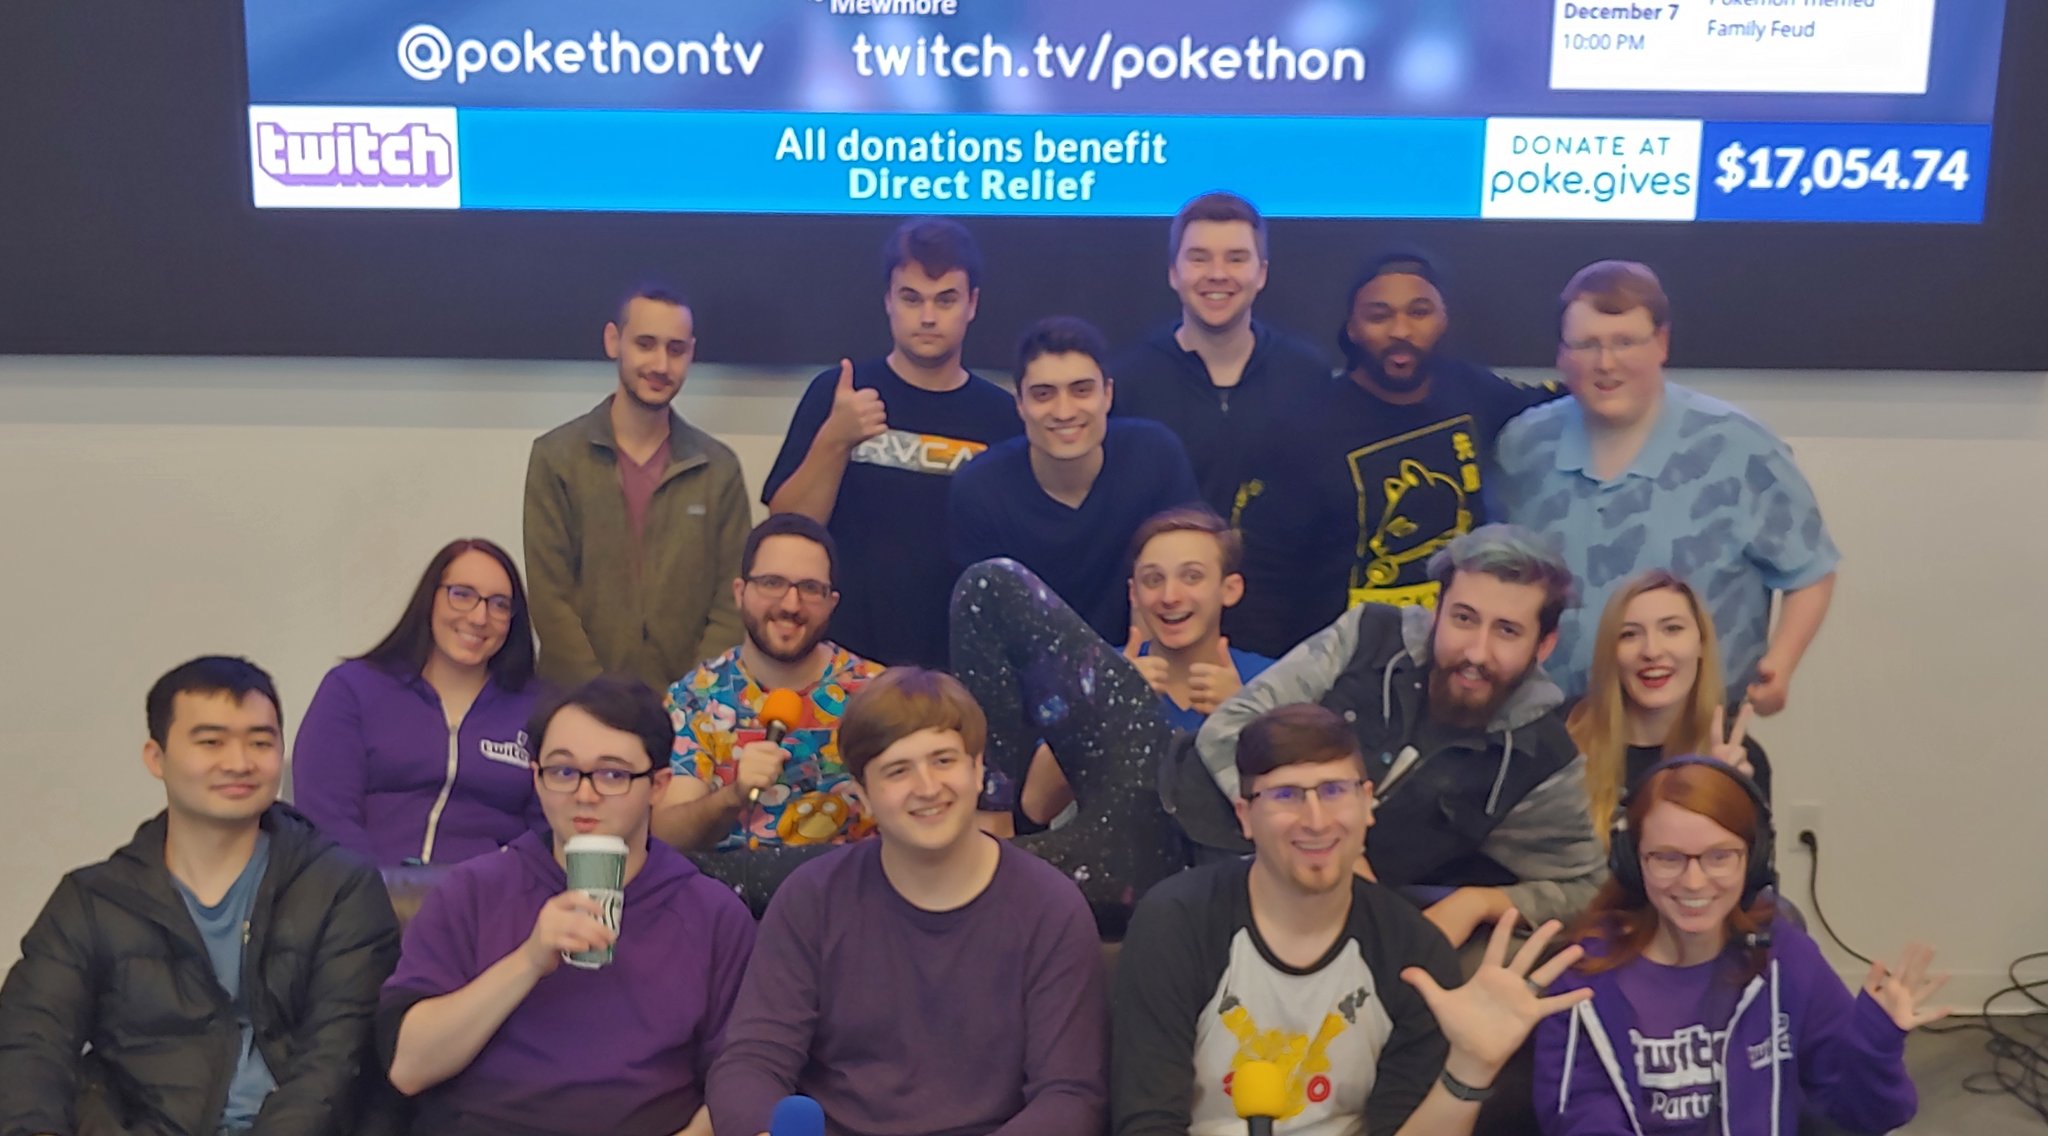 Pokethon Team Members standing together for a group photo